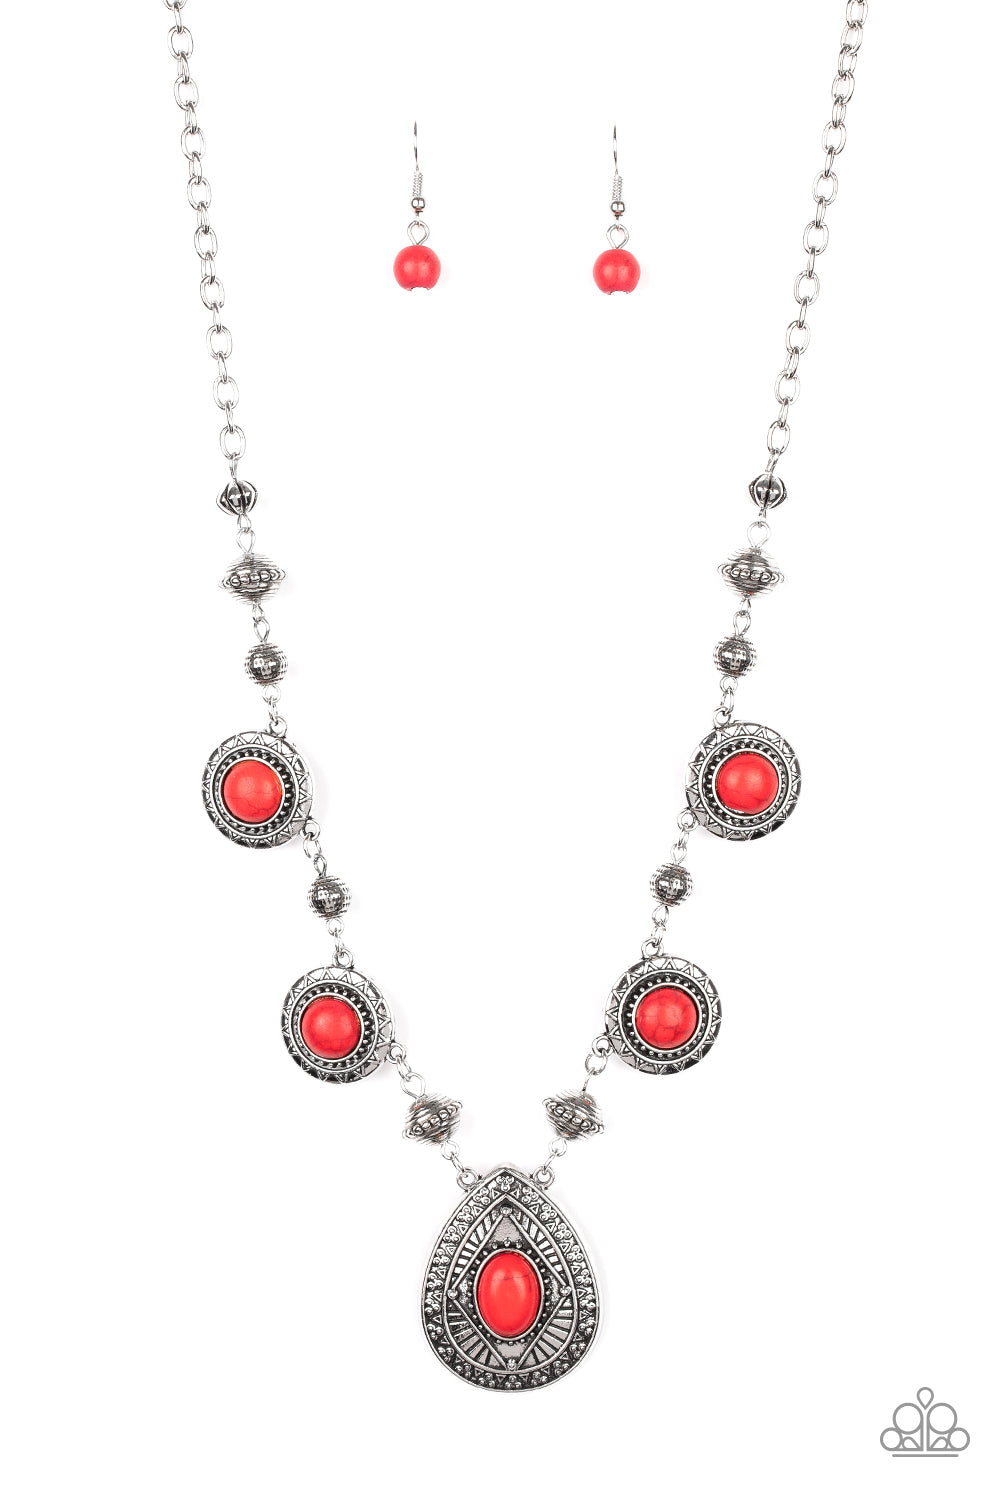 Mayan Magic - Red necklace